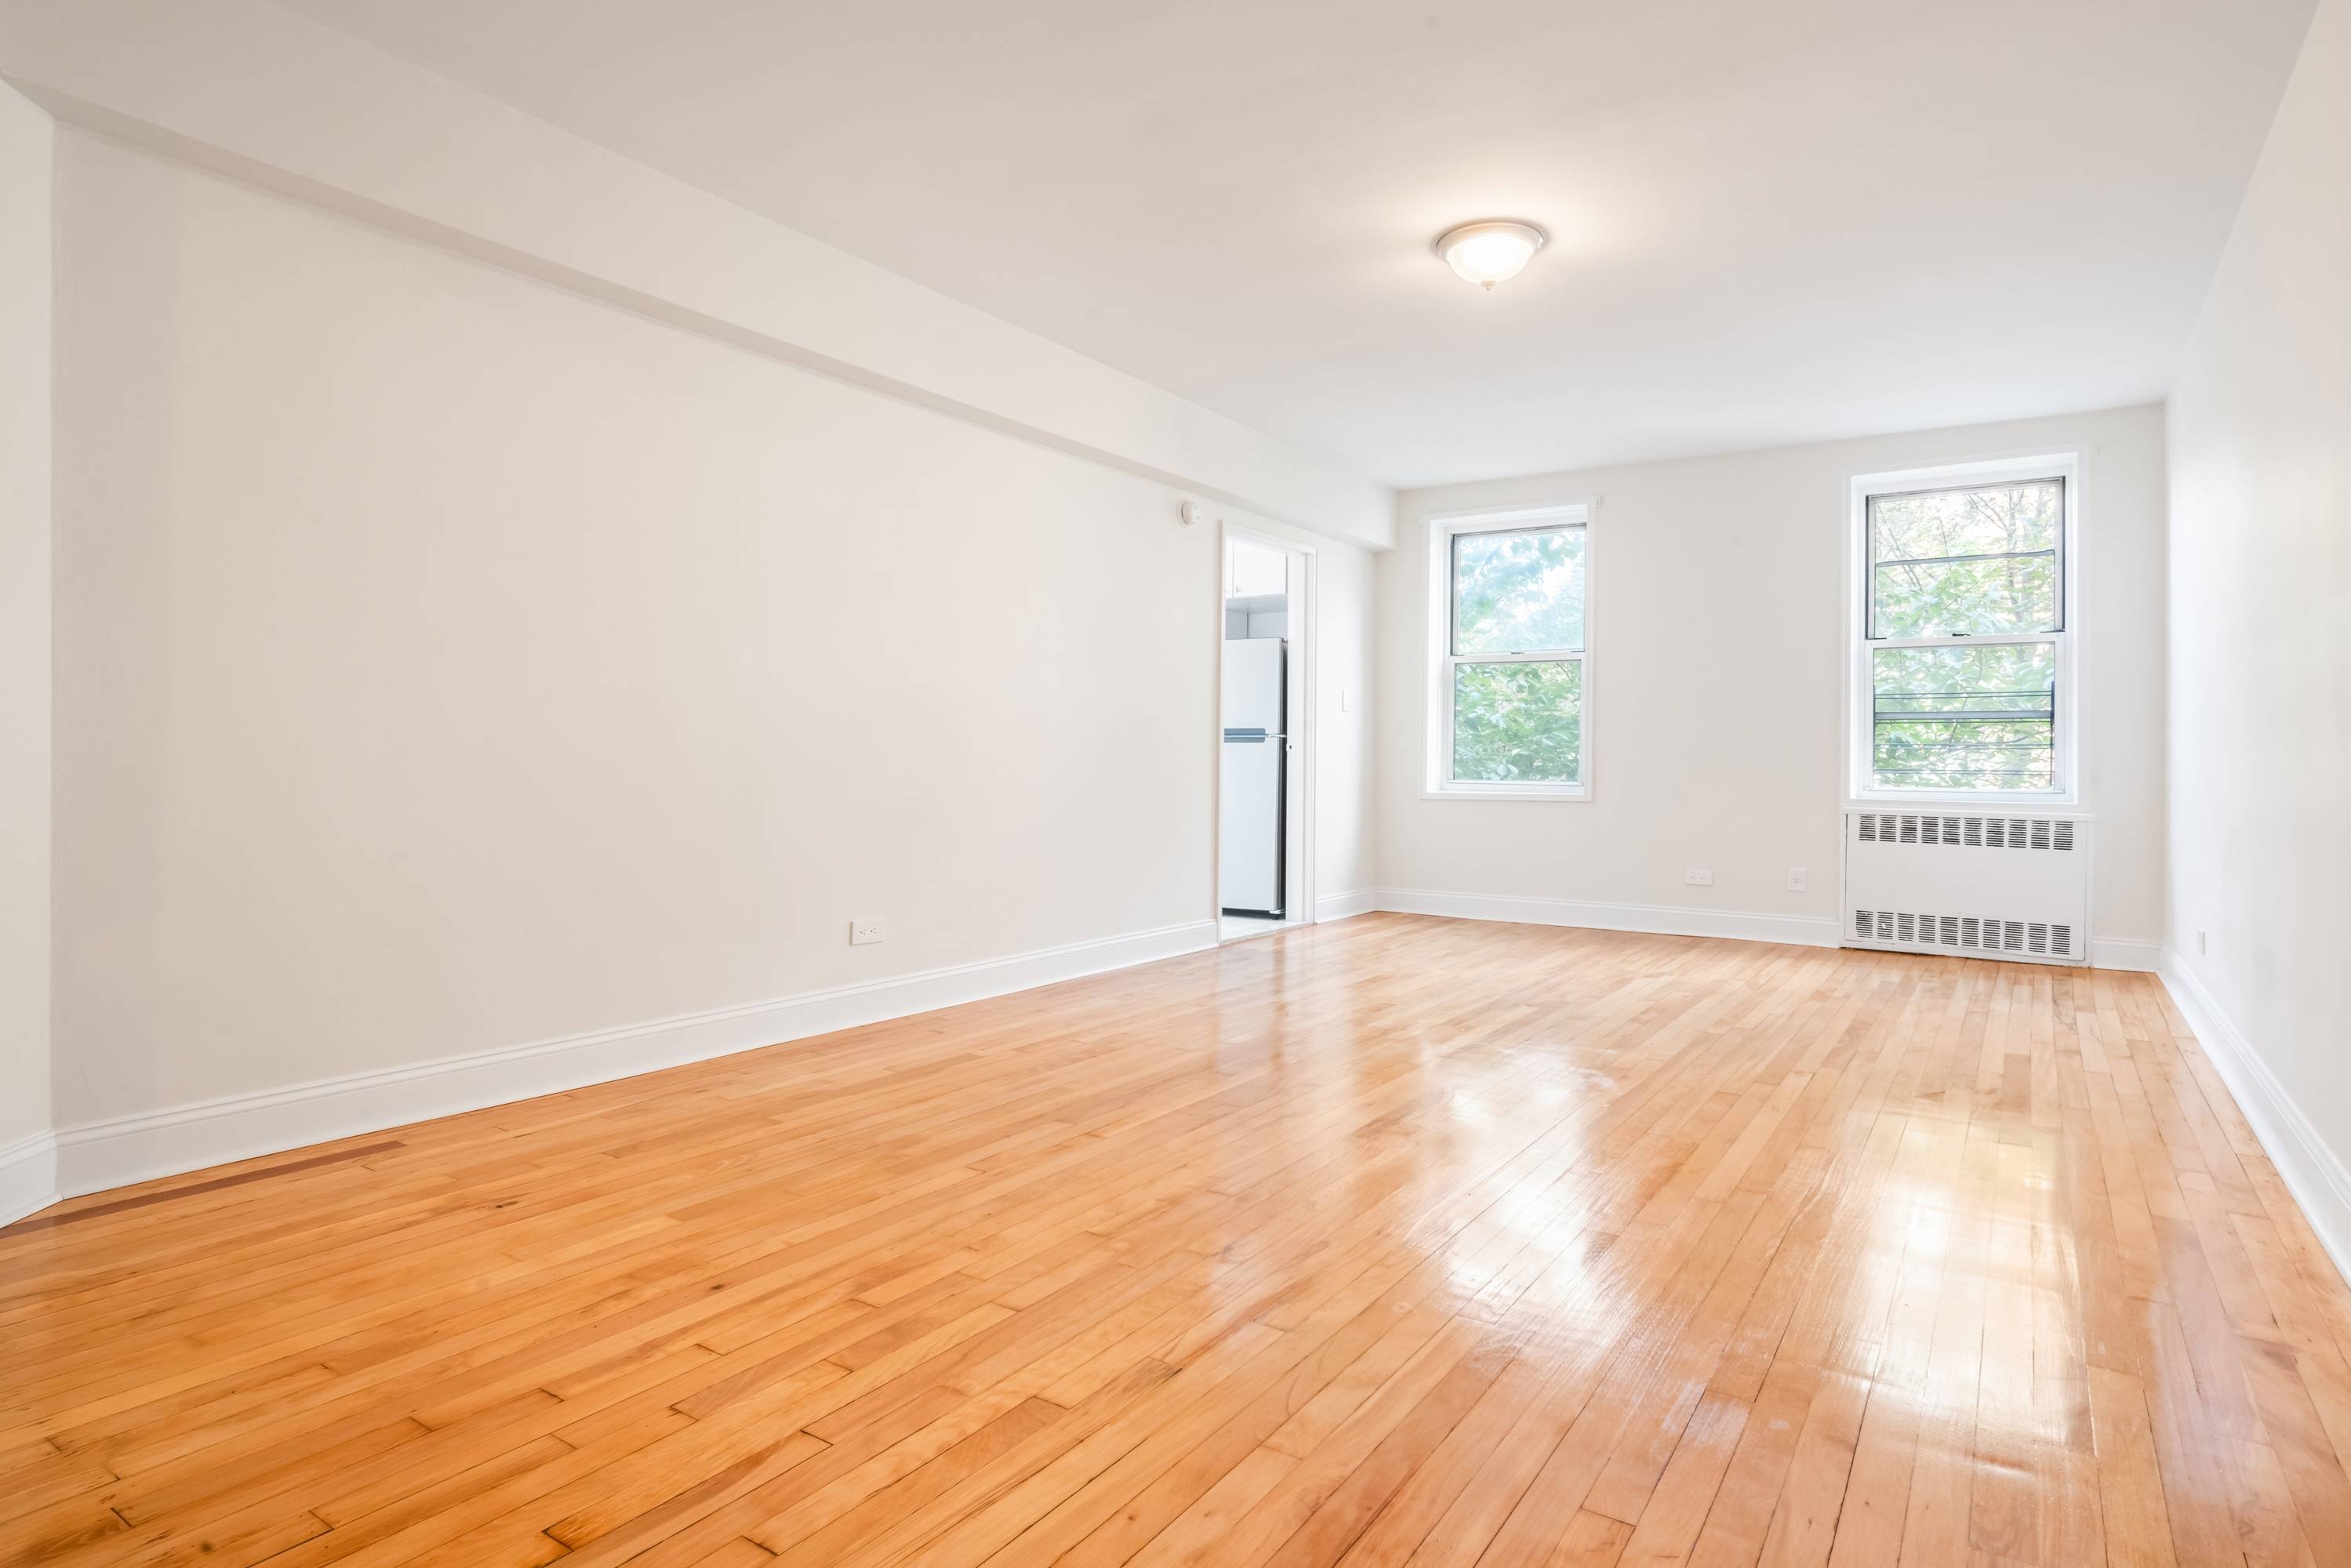 This two bedroom, one bath apartment, located in Jackson Heights features windowed kitchen and bathroom along with great closet space and hardwood floors throughout.